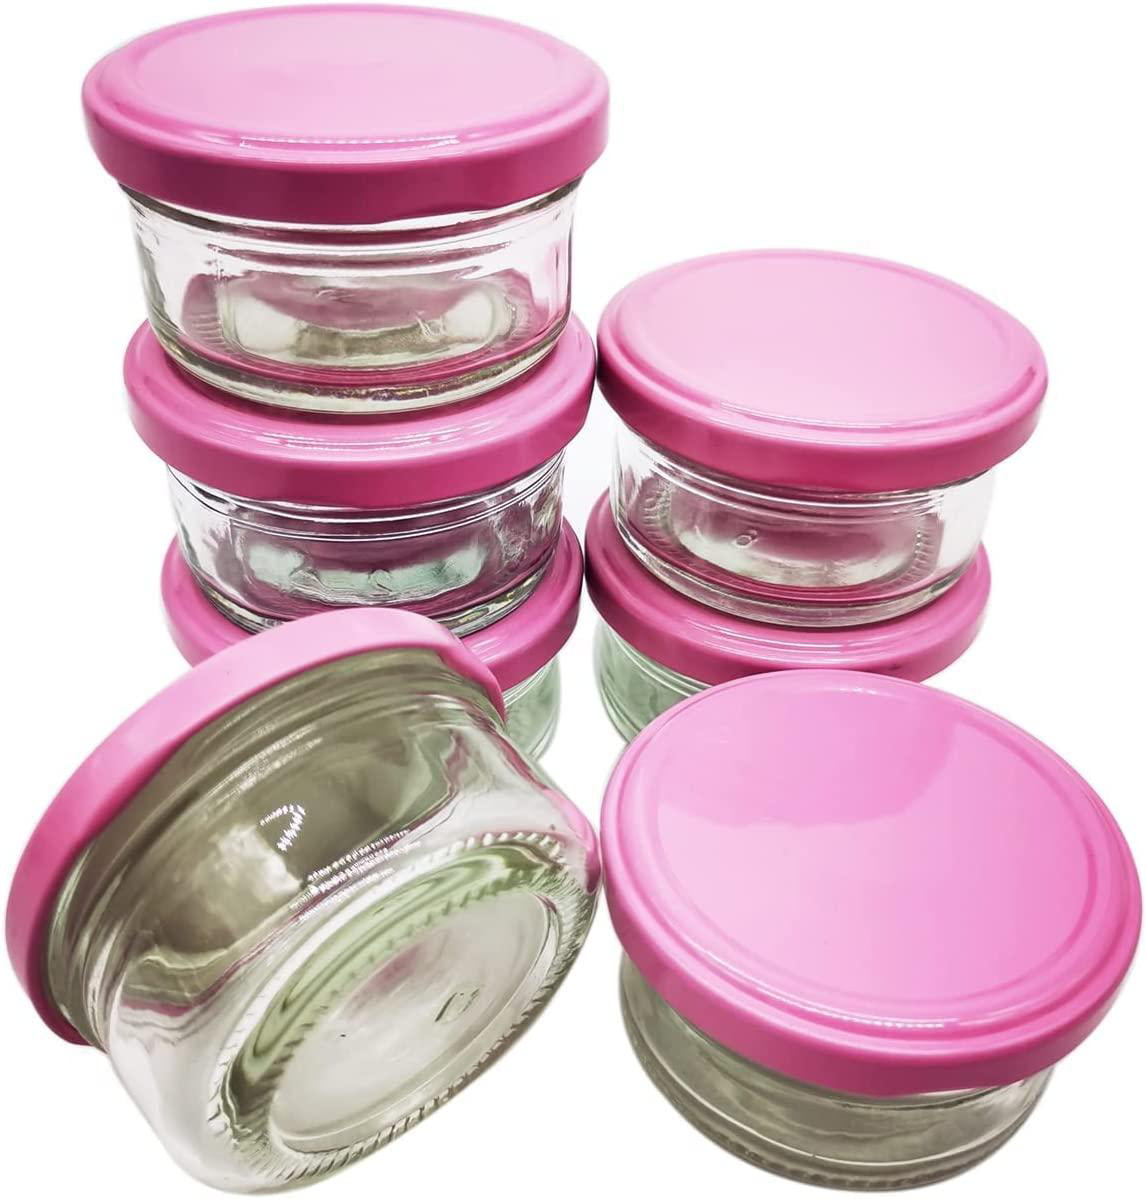 Mfacoy 6 Pack Salad Dressing Container To Go, 2.5 OZ Plastic Condiment  Containers with Lids, BPA Free Condiment Cups, Leak Proof and Reusable  Small